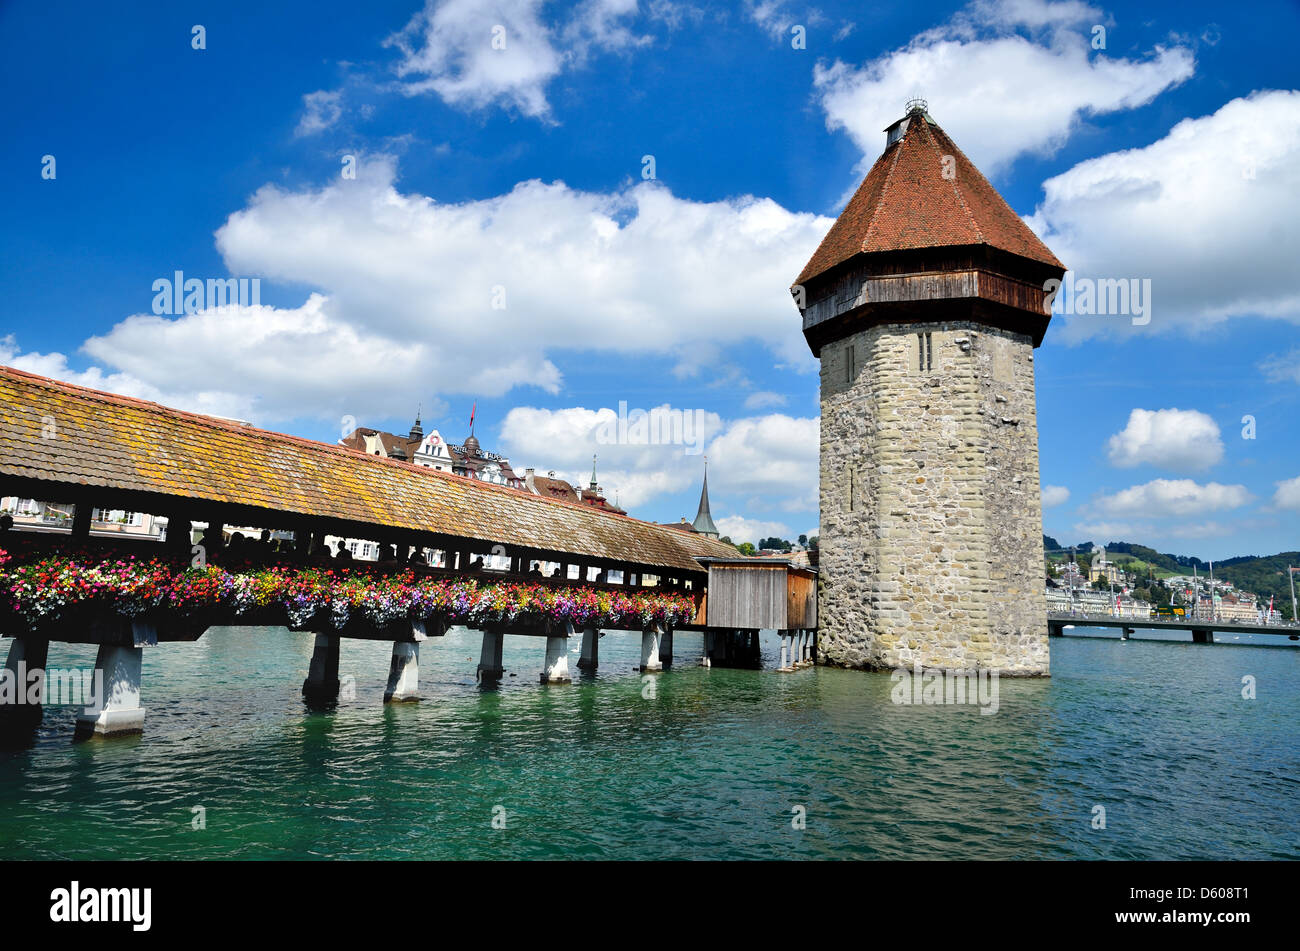 A view of the famous wooden Chapel Bridge of Luzern in Switzerland, with the tower in foreground Stock Photo